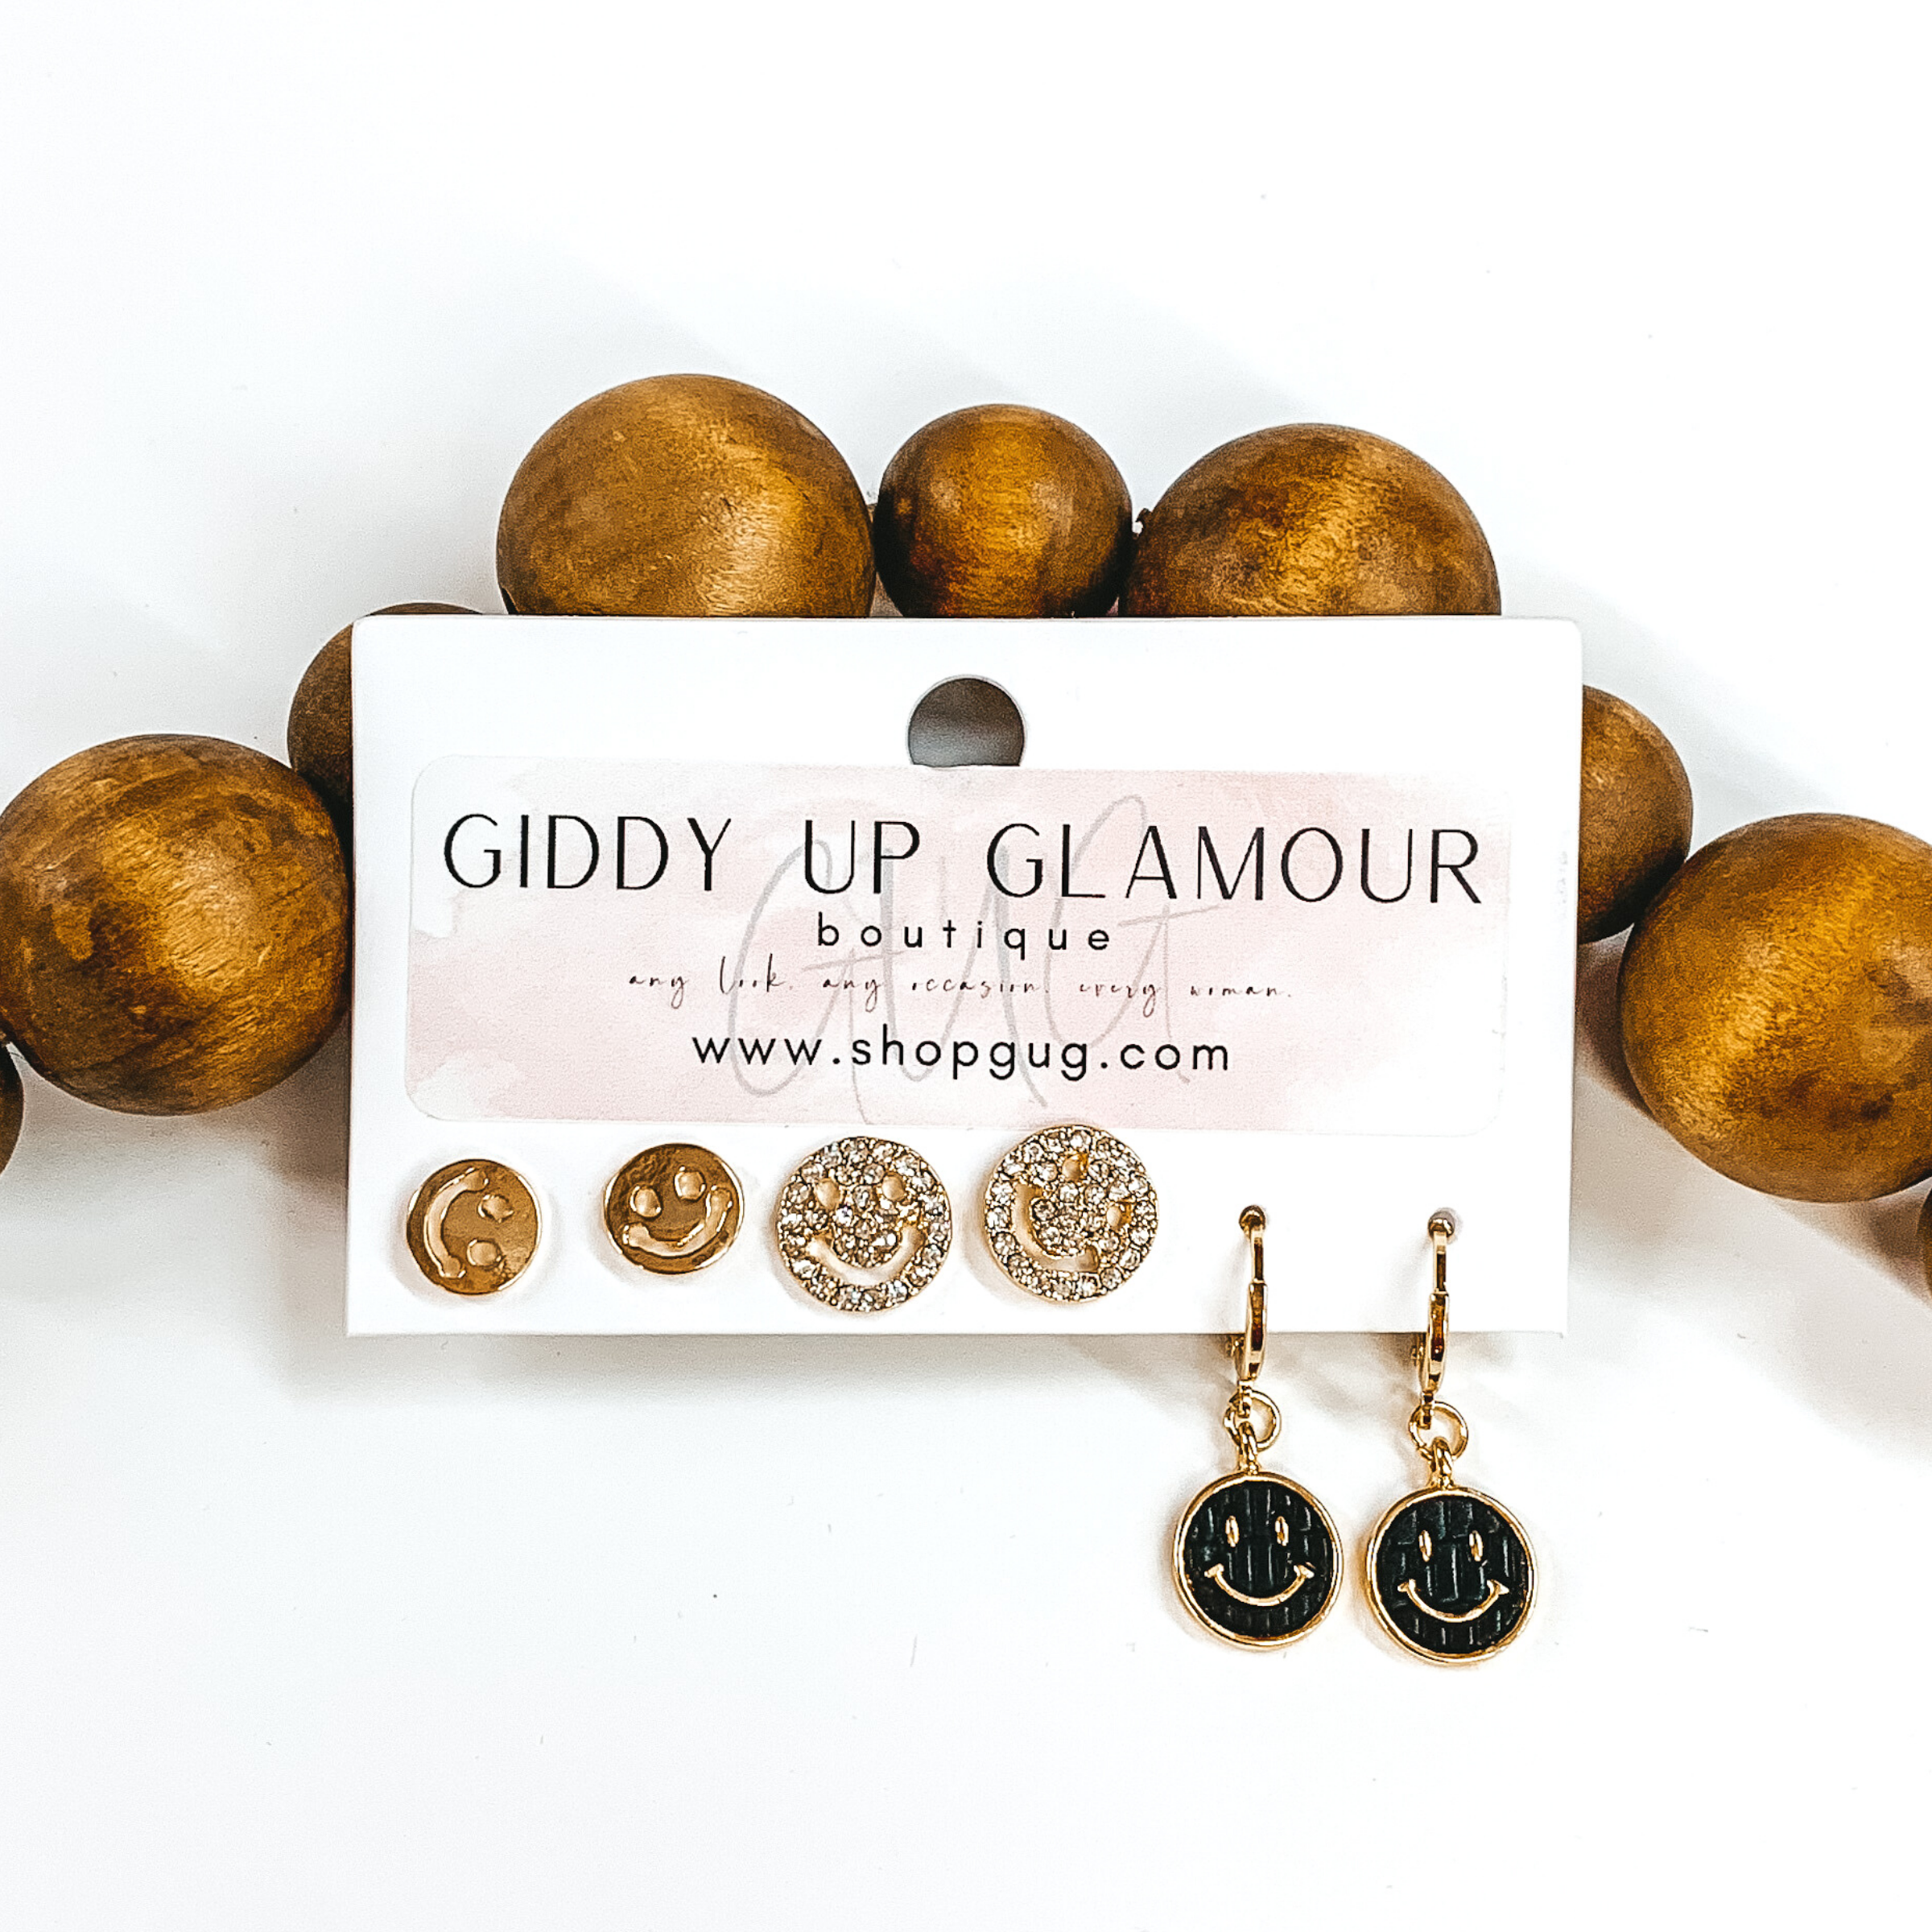 This is a 3 piece gold and pearl earring set. There is a pair of gold smiley face studs, a gold pair smiley face studs with clear crystals, and a pair of dangle pearls with hanging circle black pendant with a gold smiley face. These earrings are pictured on a Giddy Up Glamour earring holder laying in front of tan beads on a white background.  